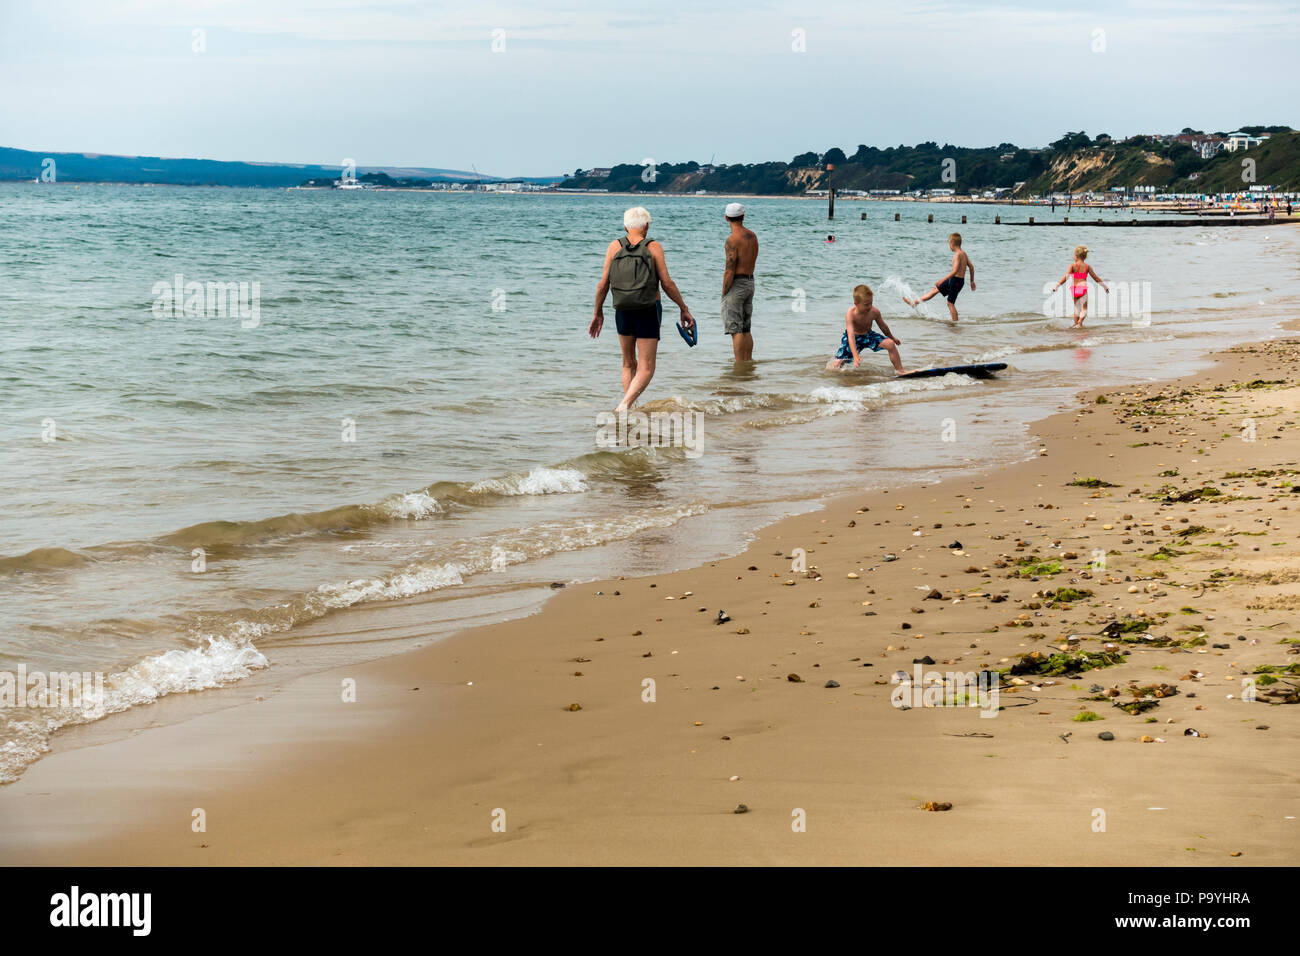 Children playing in the sea on Bournemouth beach in the summer season, UK heatwave, July 2018 Stock Photo